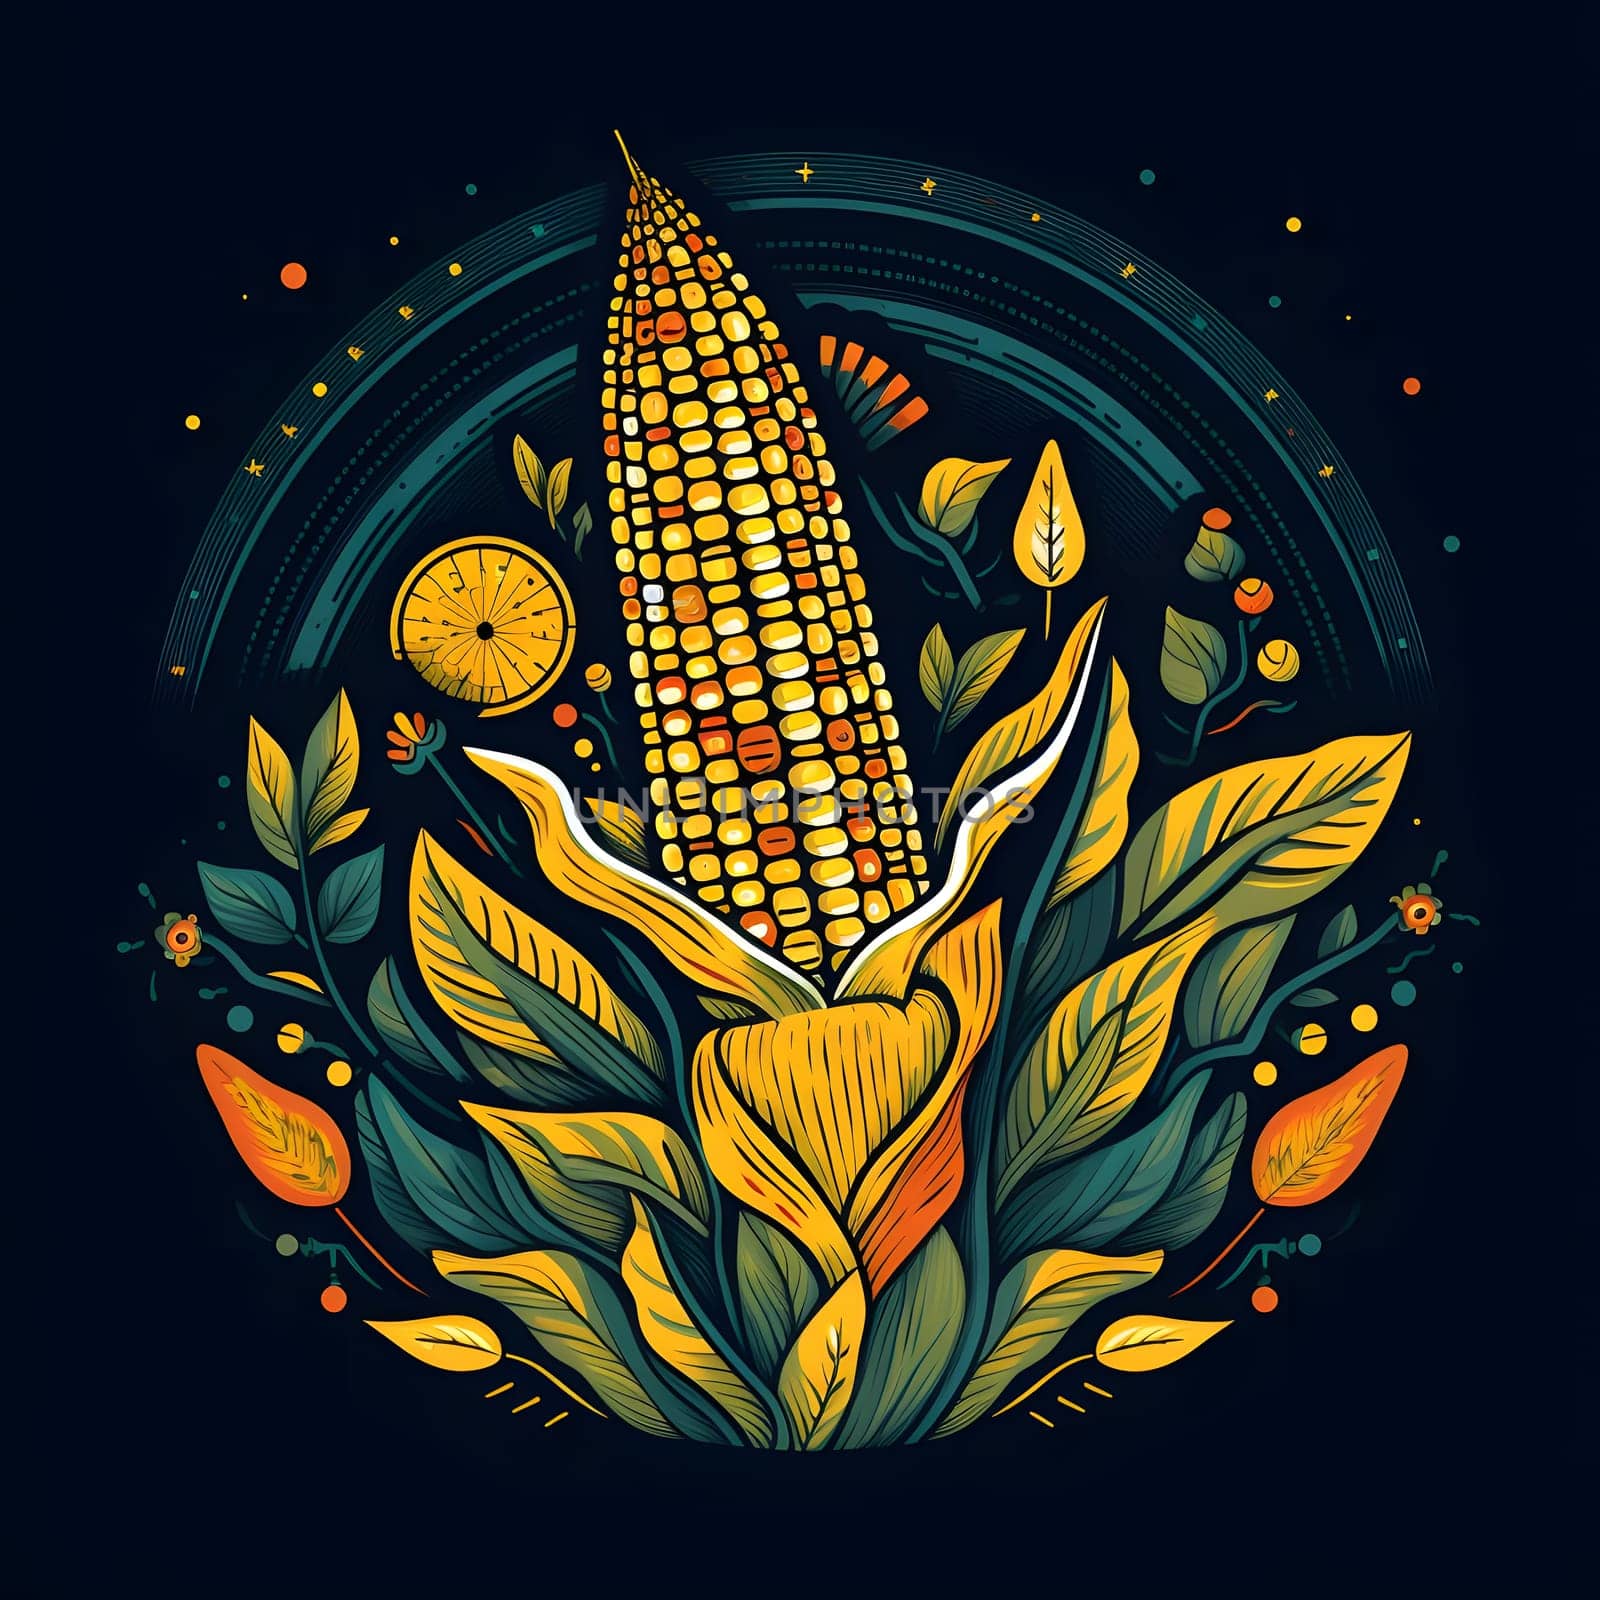 Logo corn cob in leaf in circle on solid dark background. Corn as a dish of thanksgiving for the harvest. An atmosphere of joy and celebration.